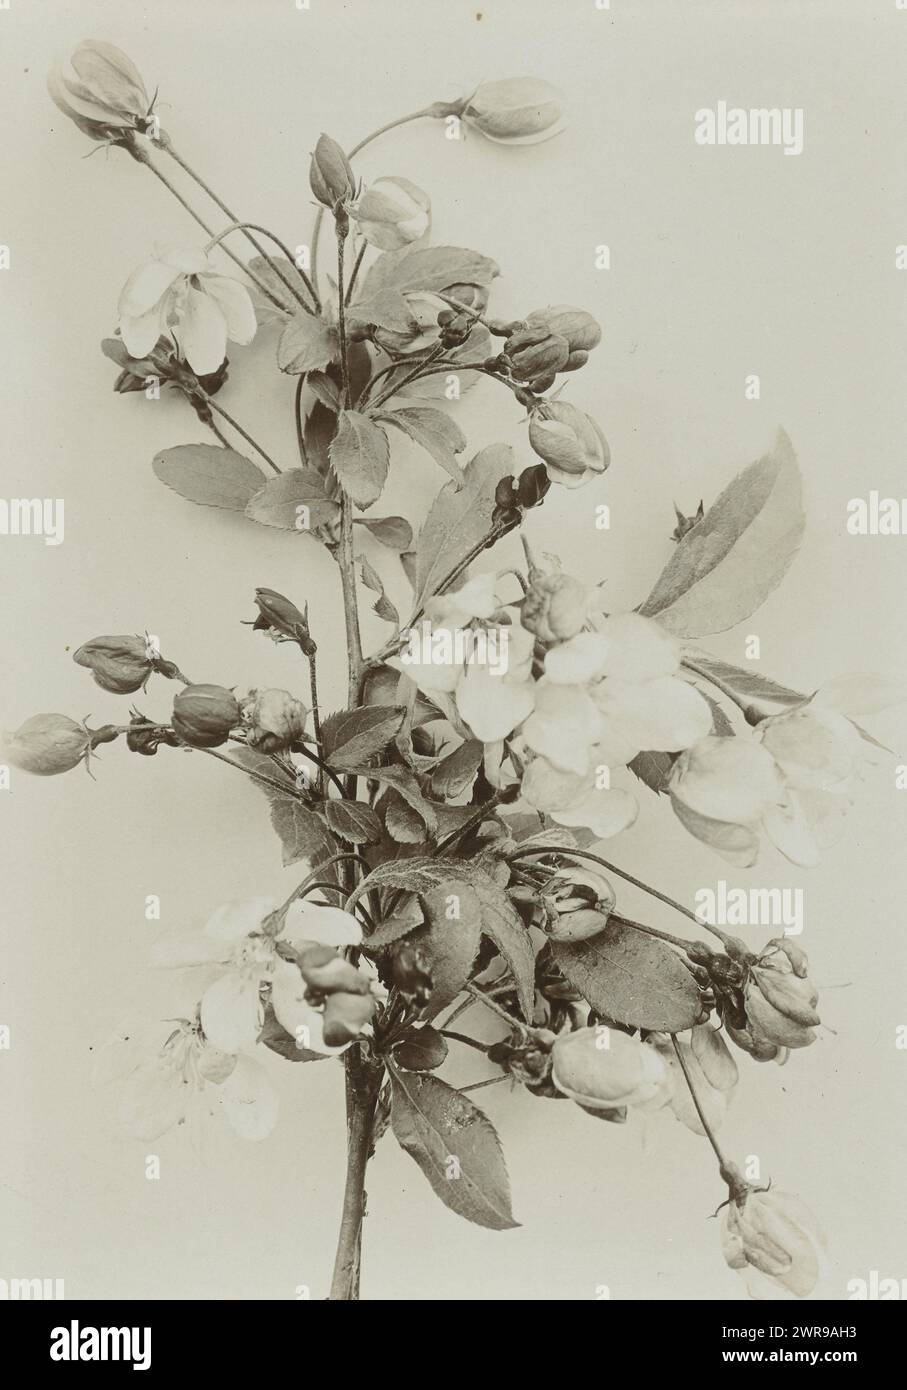 Branch with blossom of an ornamental apple tree, Malus floribunda atrosanguinea flowering branch (title on object), Richard Tepe, Netherlands, c. 1900 - c. 1930, photographic support, height 165 mm × width 116 mm, photograph Stock Photo